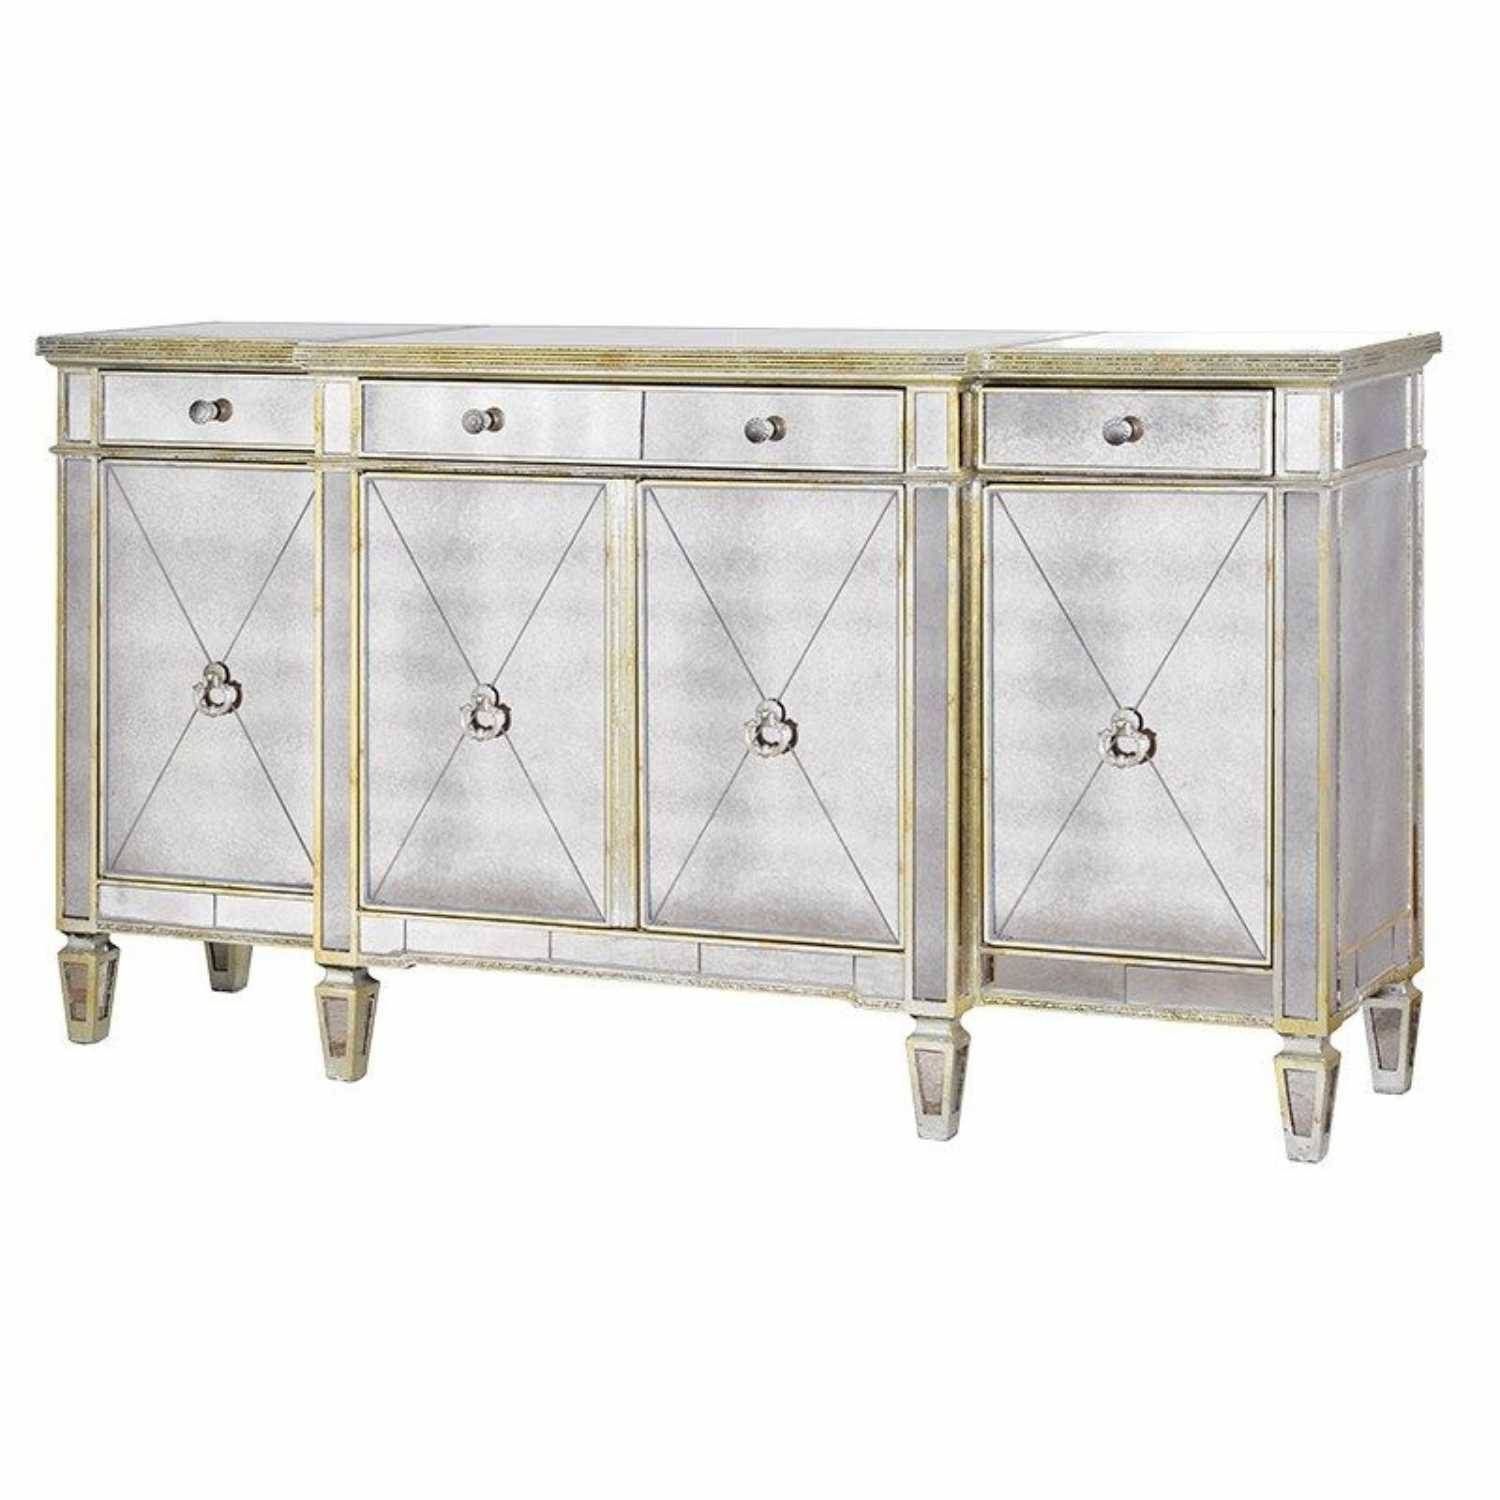 Large Antique Seville Venetian Mirrored Glass Sideboard 4 Door Within Venetian Mirrored Sideboard (View 7 of 20)